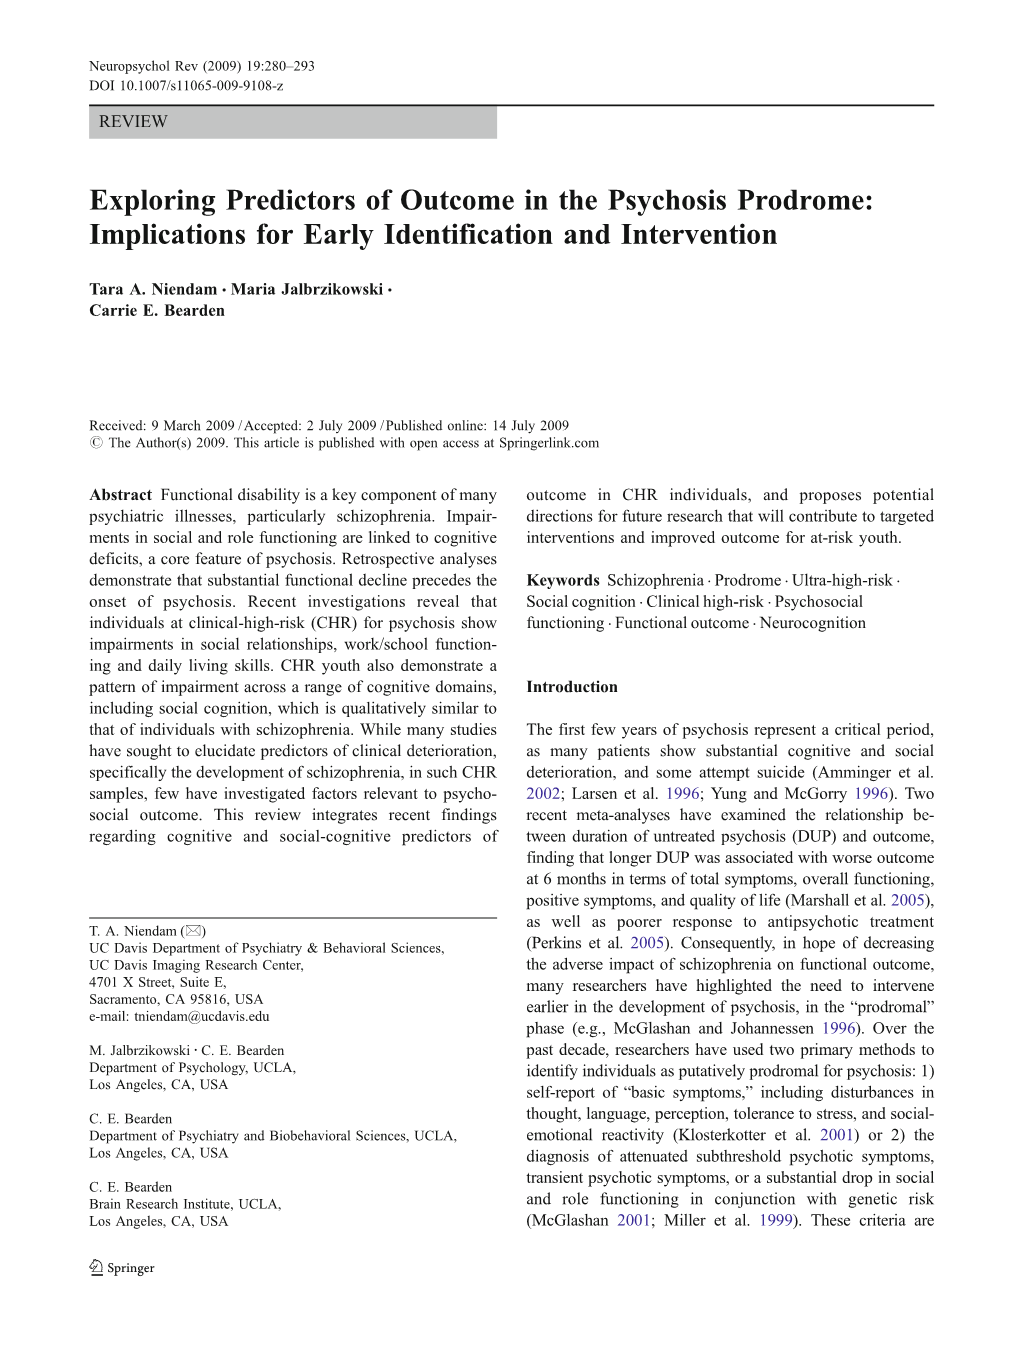 Exploring Predictors of Outcome in the Psychosis Prodrome: Implications for Early Identification and Intervention